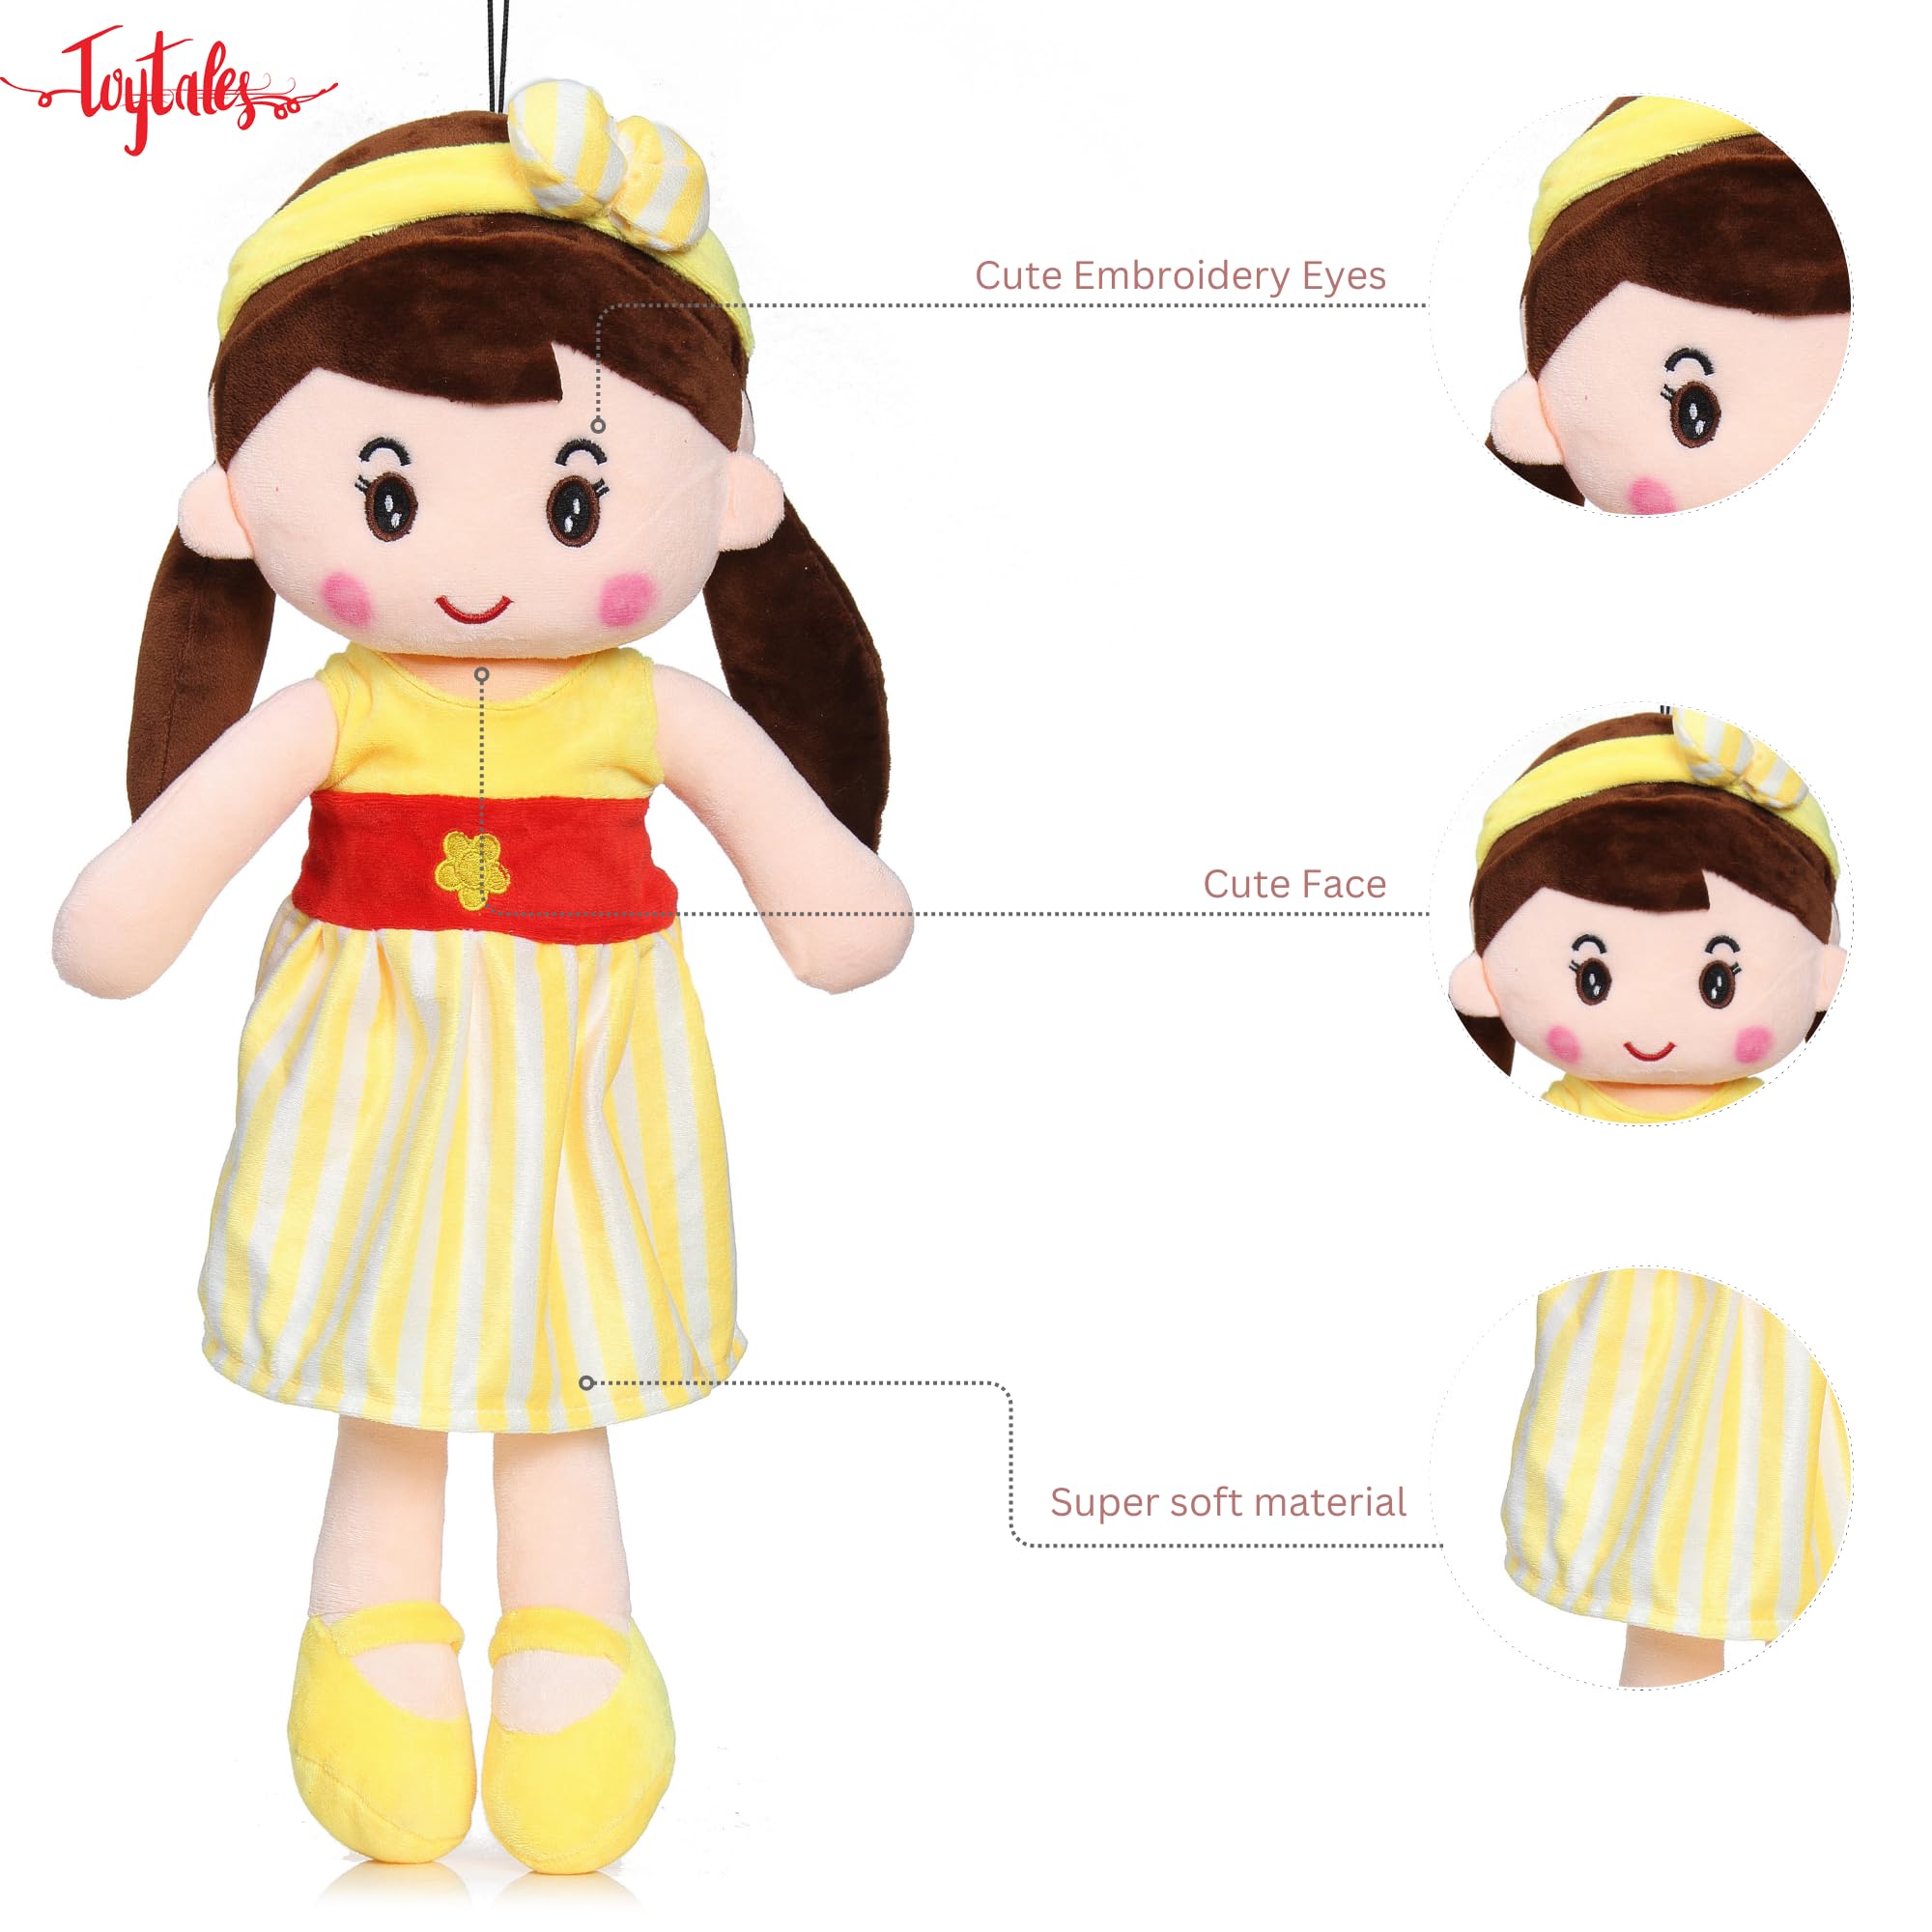 Cute Super Soft Stuffed Doll Small Size 40cm, Cuddly Squishy Dolls, Plush Toy for Baby Girls, Spark Imaginative Play, Safe & Fun Gift for Kids, Perfect for Playtime & Cuddling (Yellow)